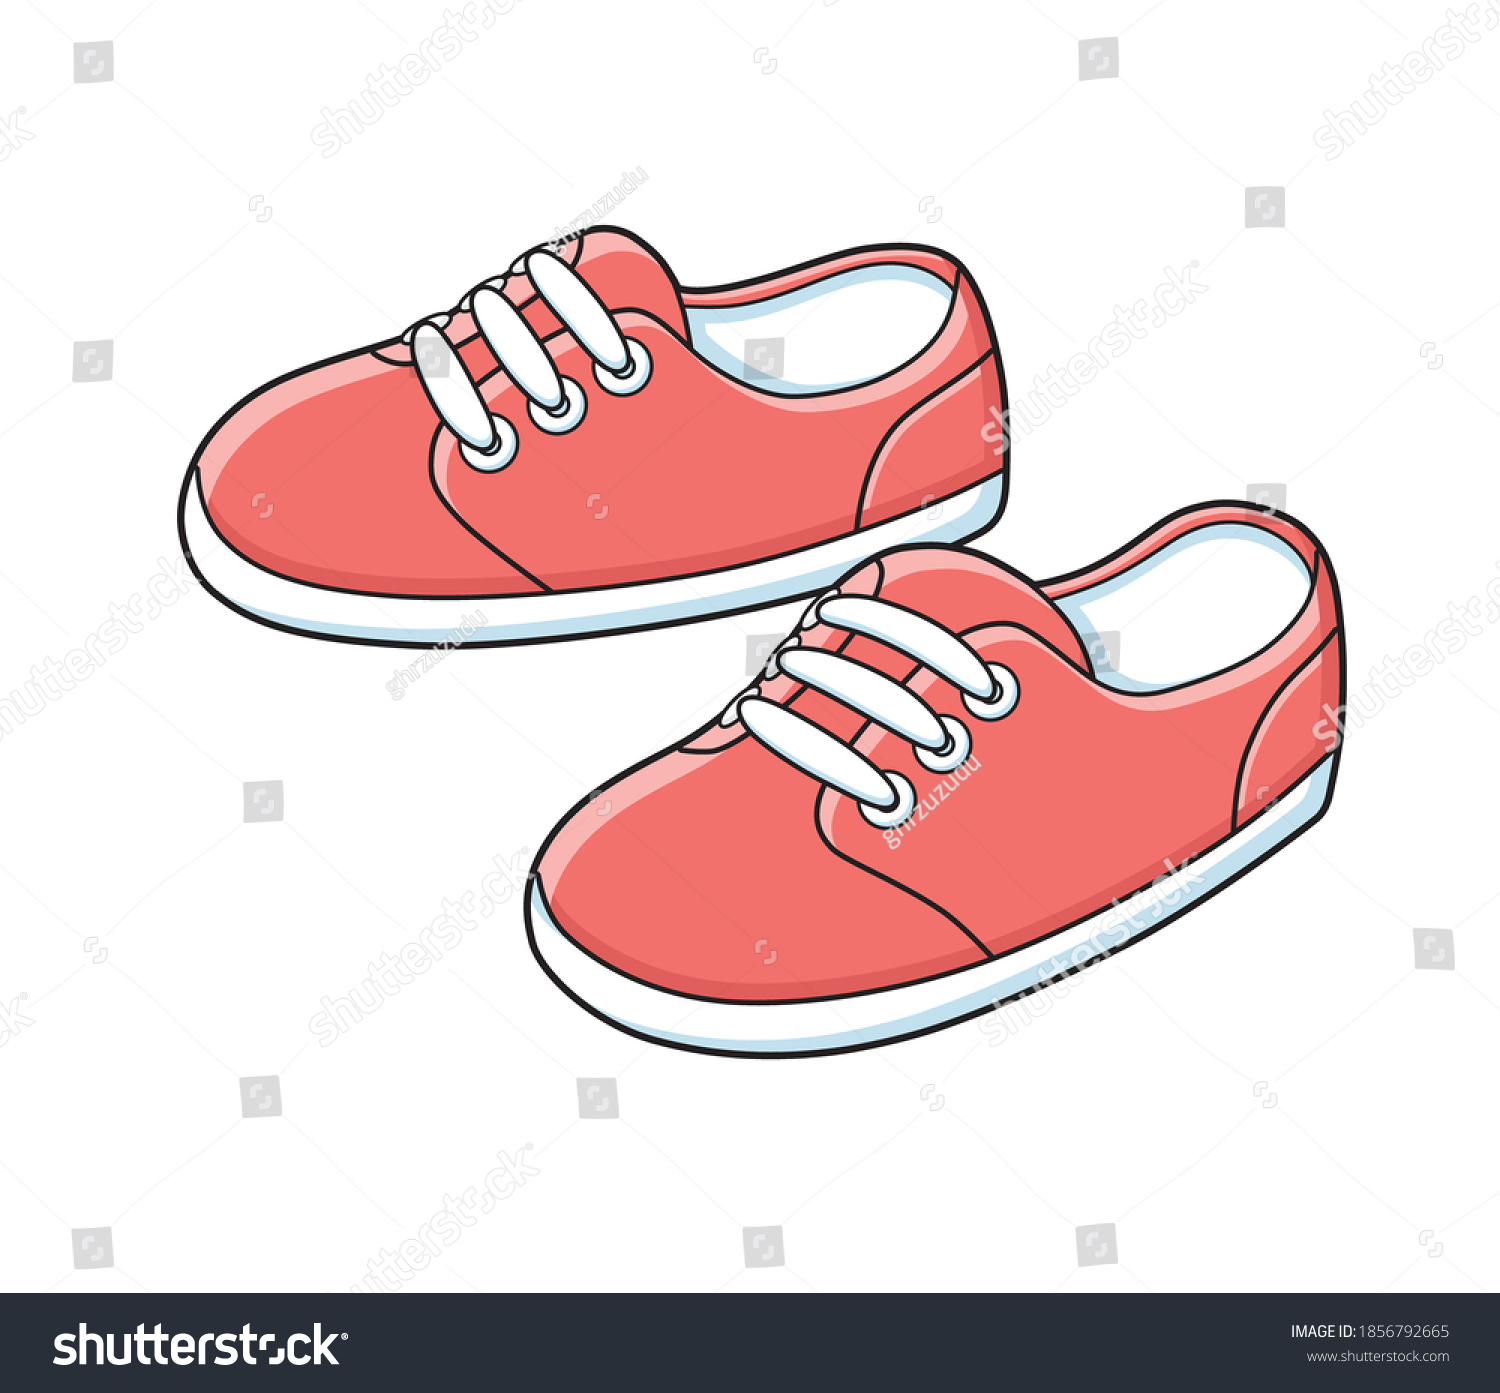 197,766 Two shoes Images, Stock Photos & Vectors | Shutterstock